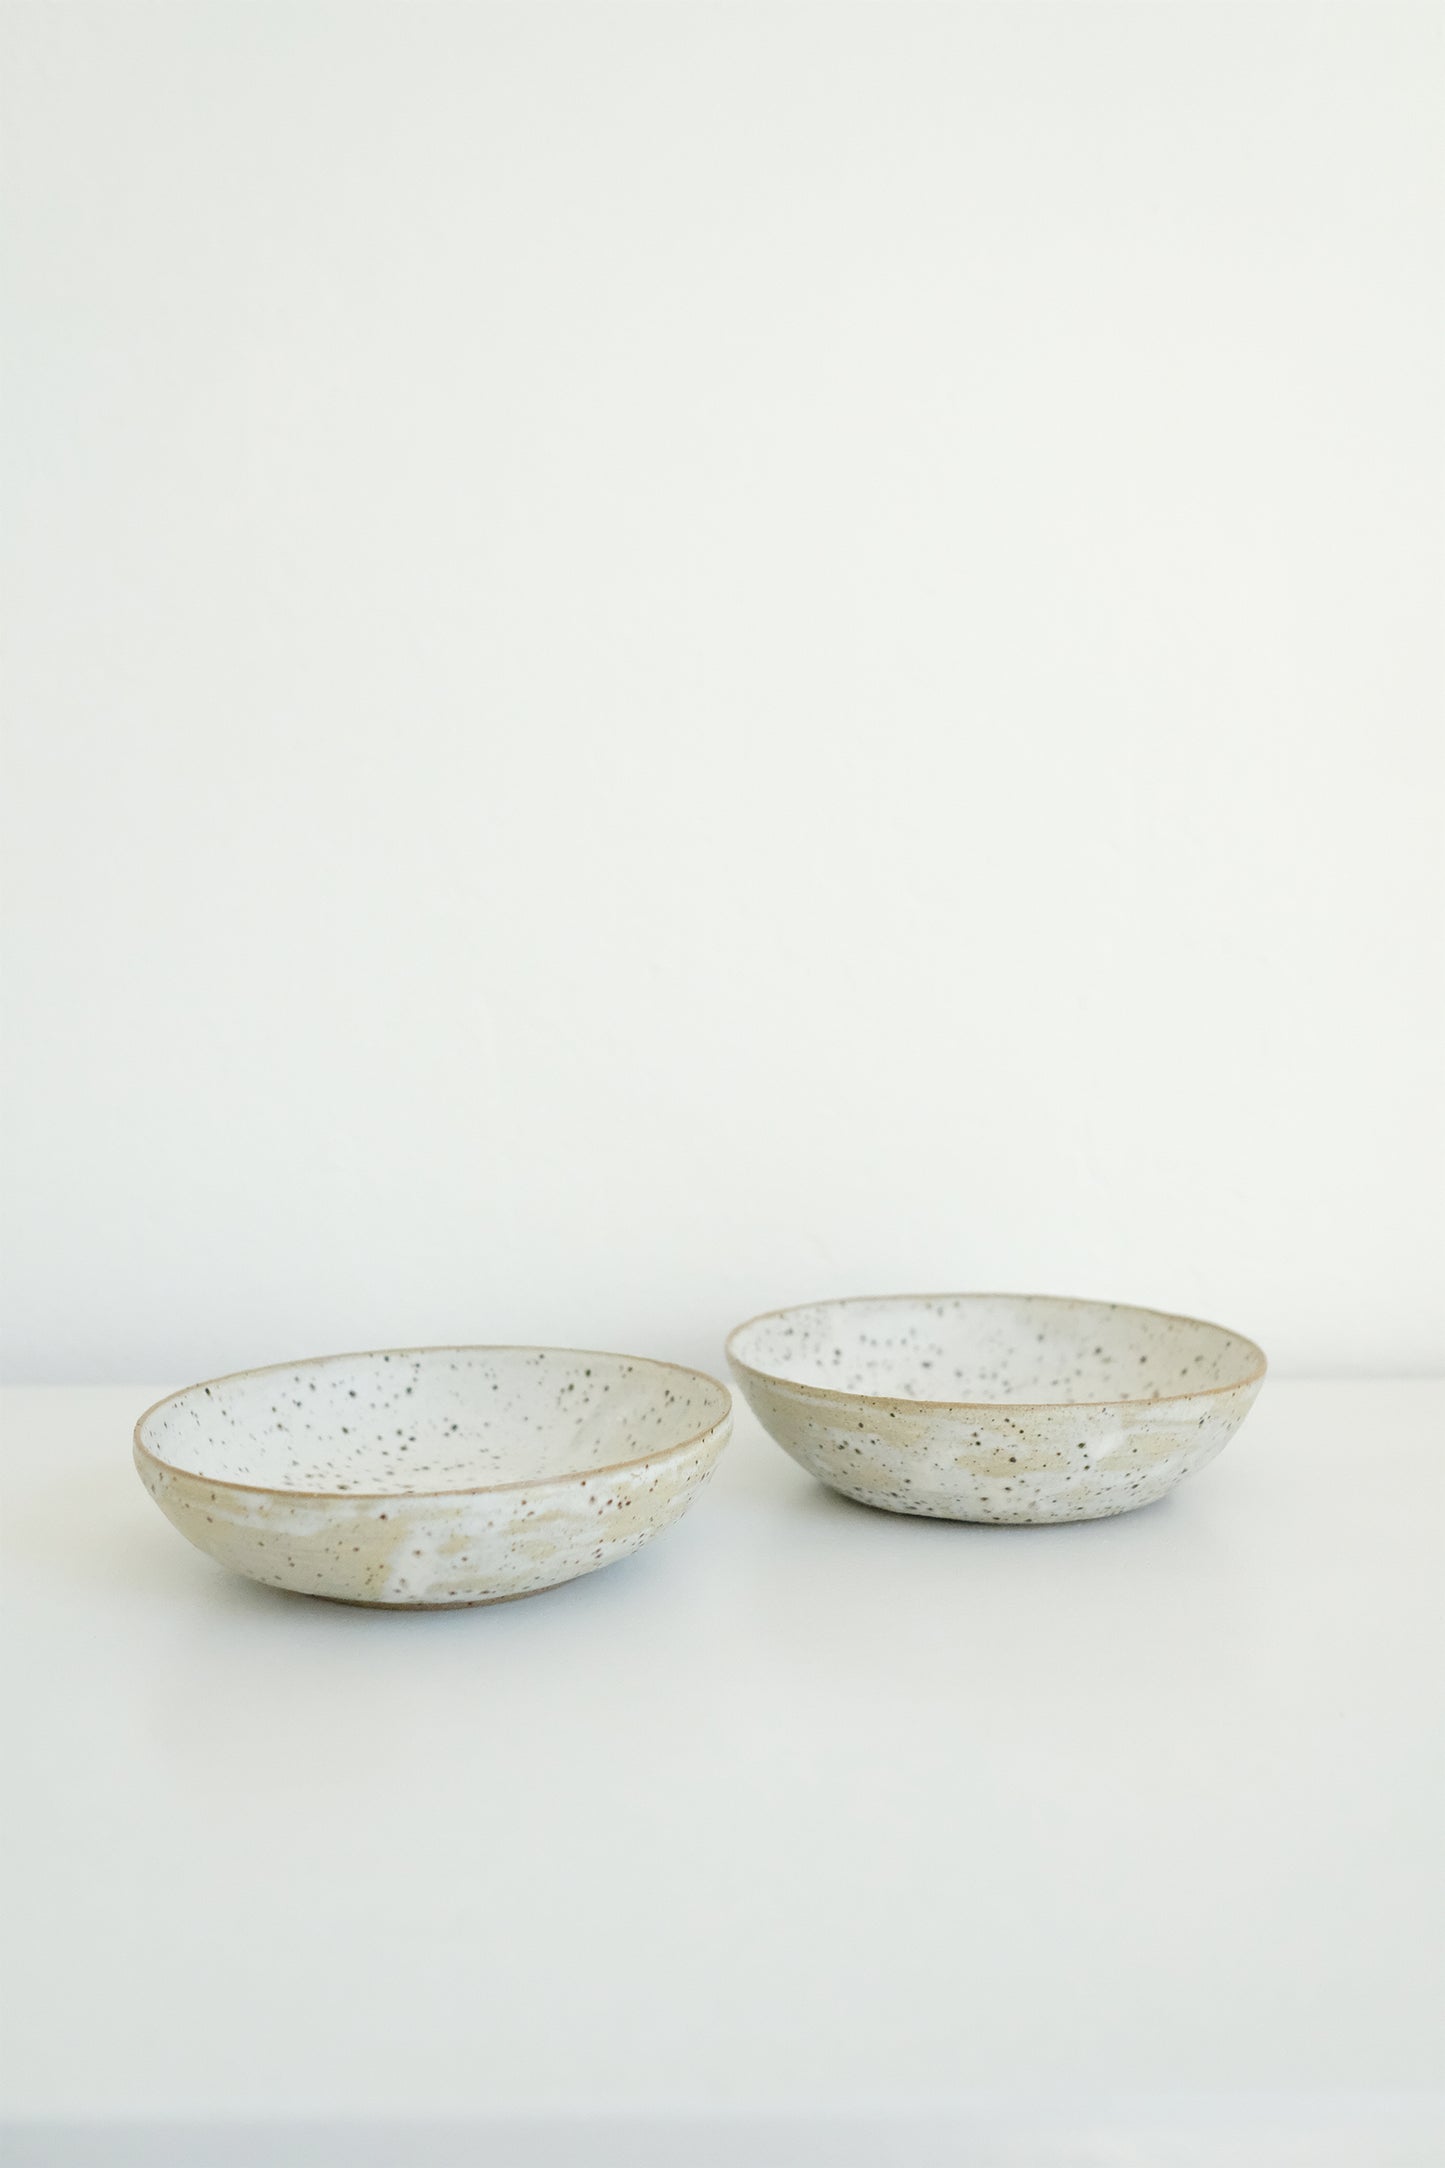 low snack bowls #1 - set of 2